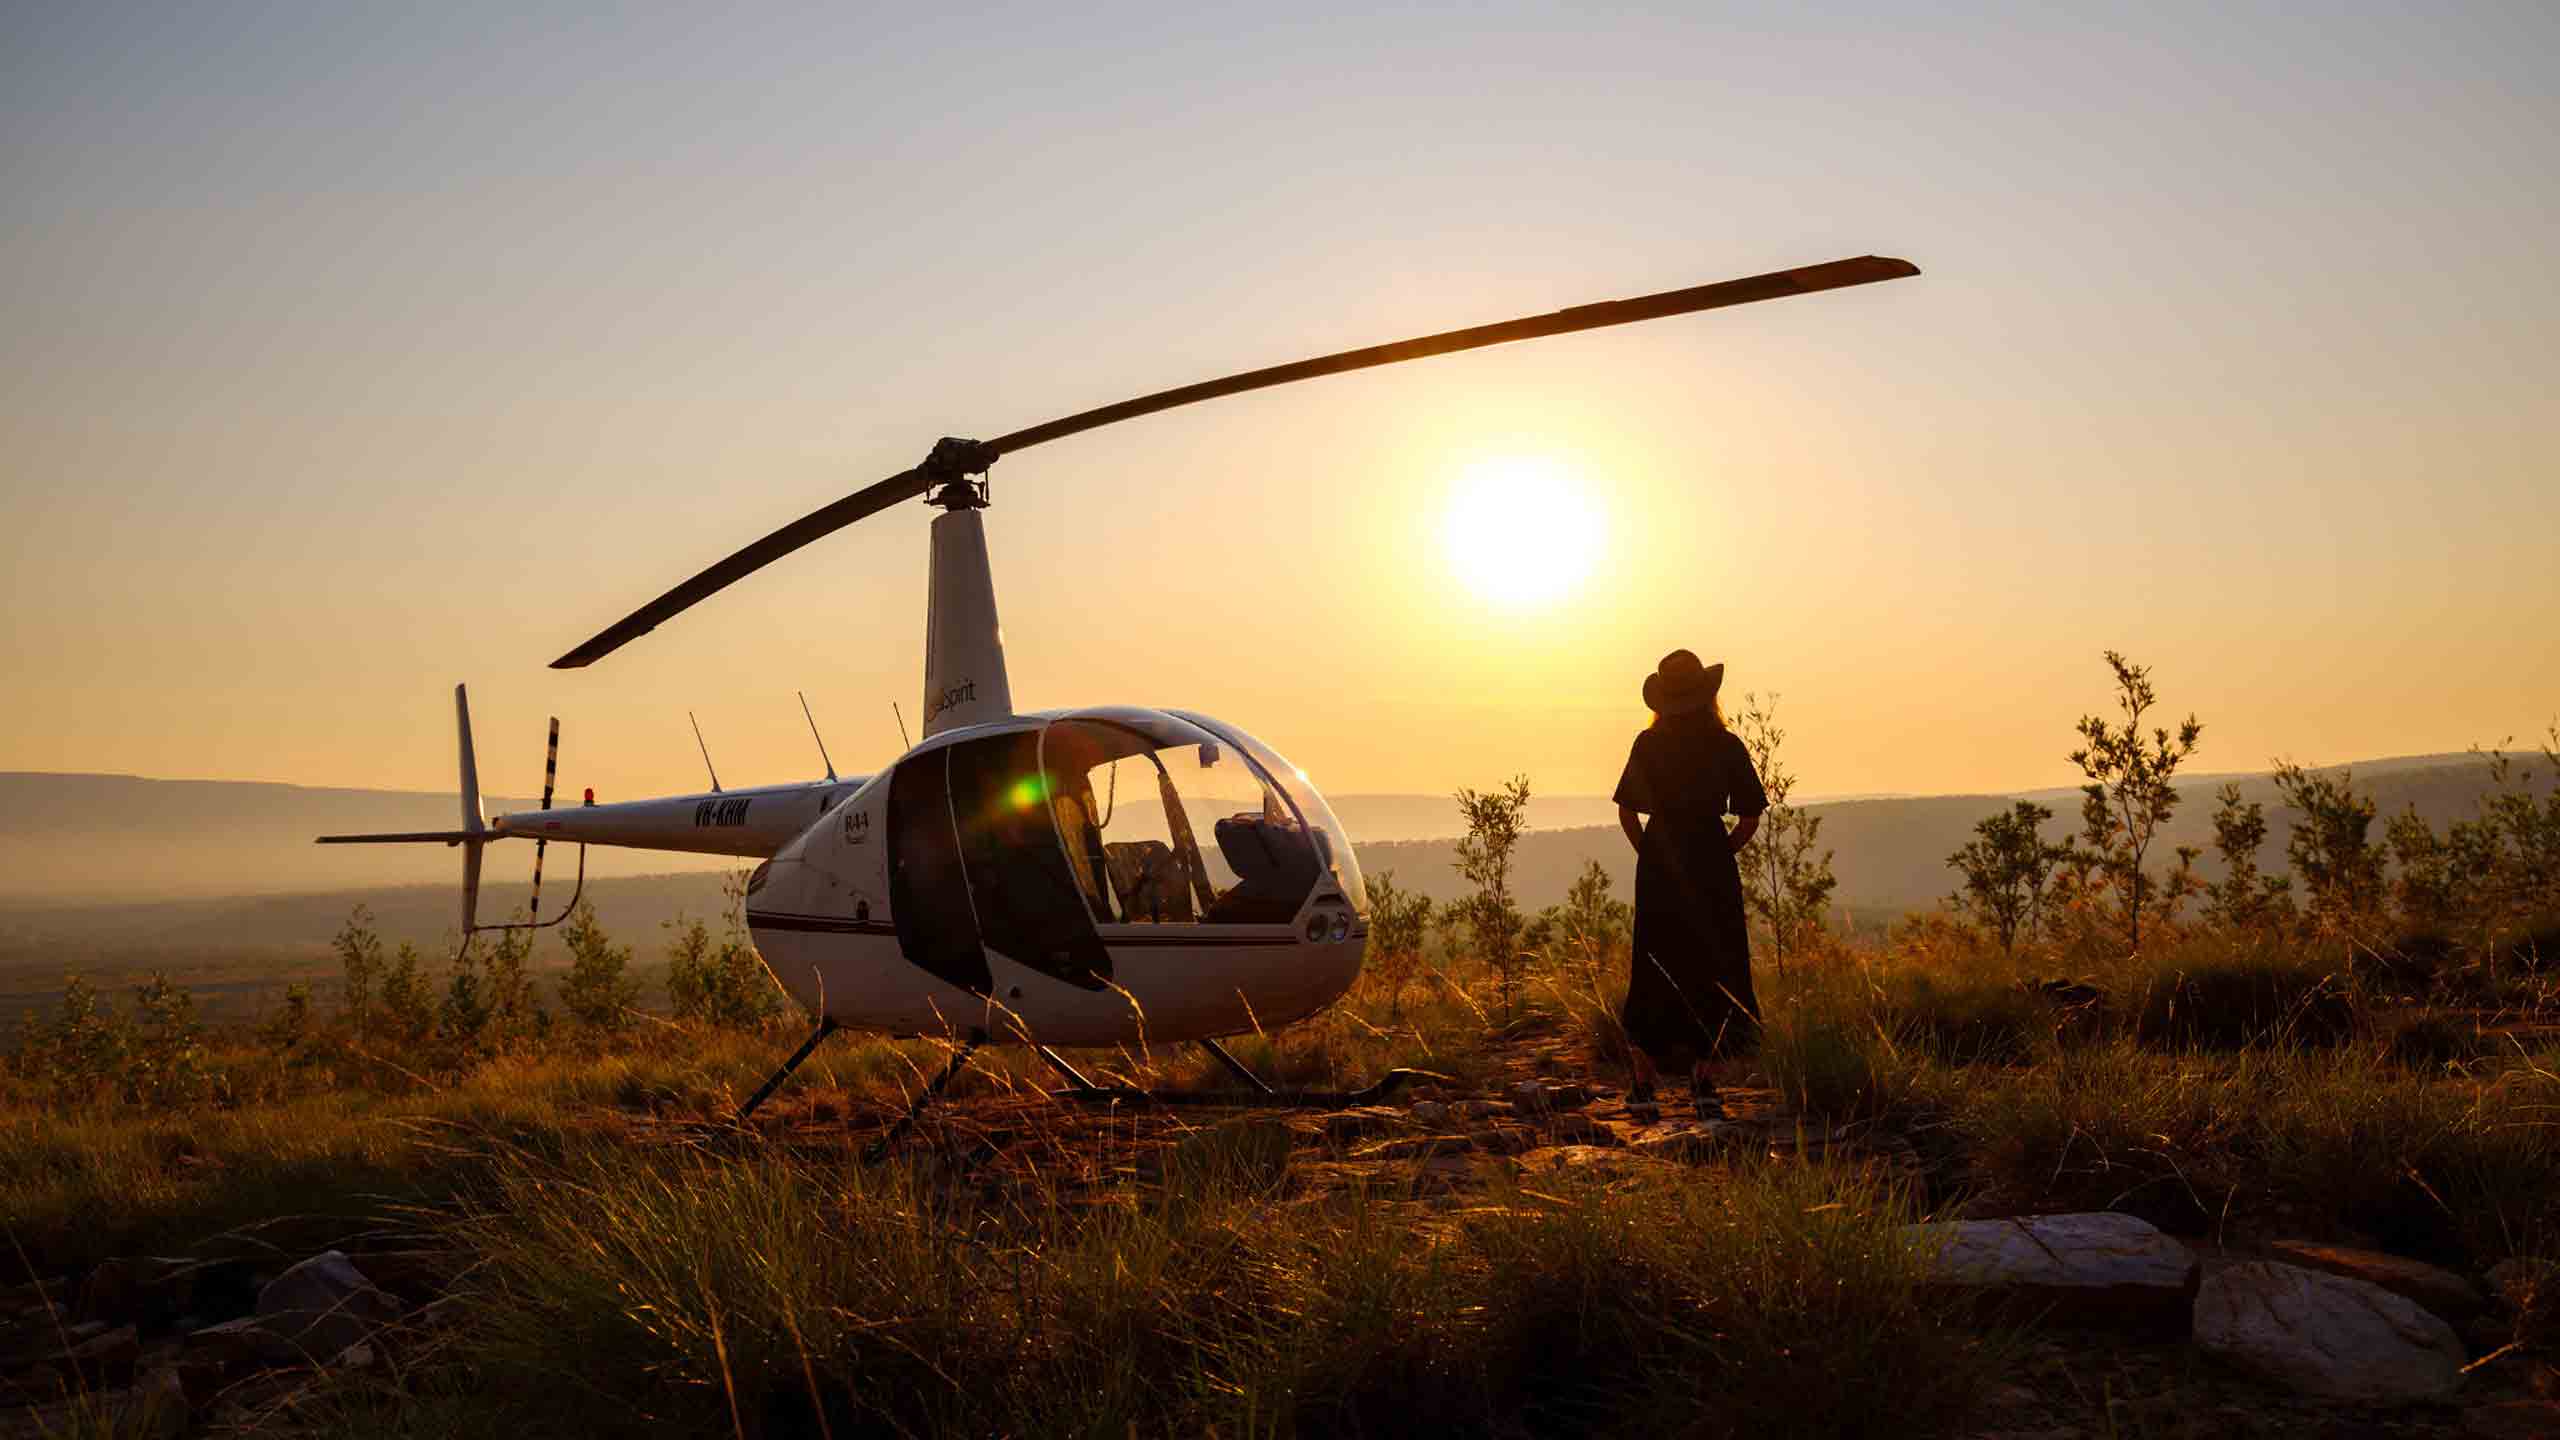 el-questro-station-kimberley-helicopter-sunset-flight